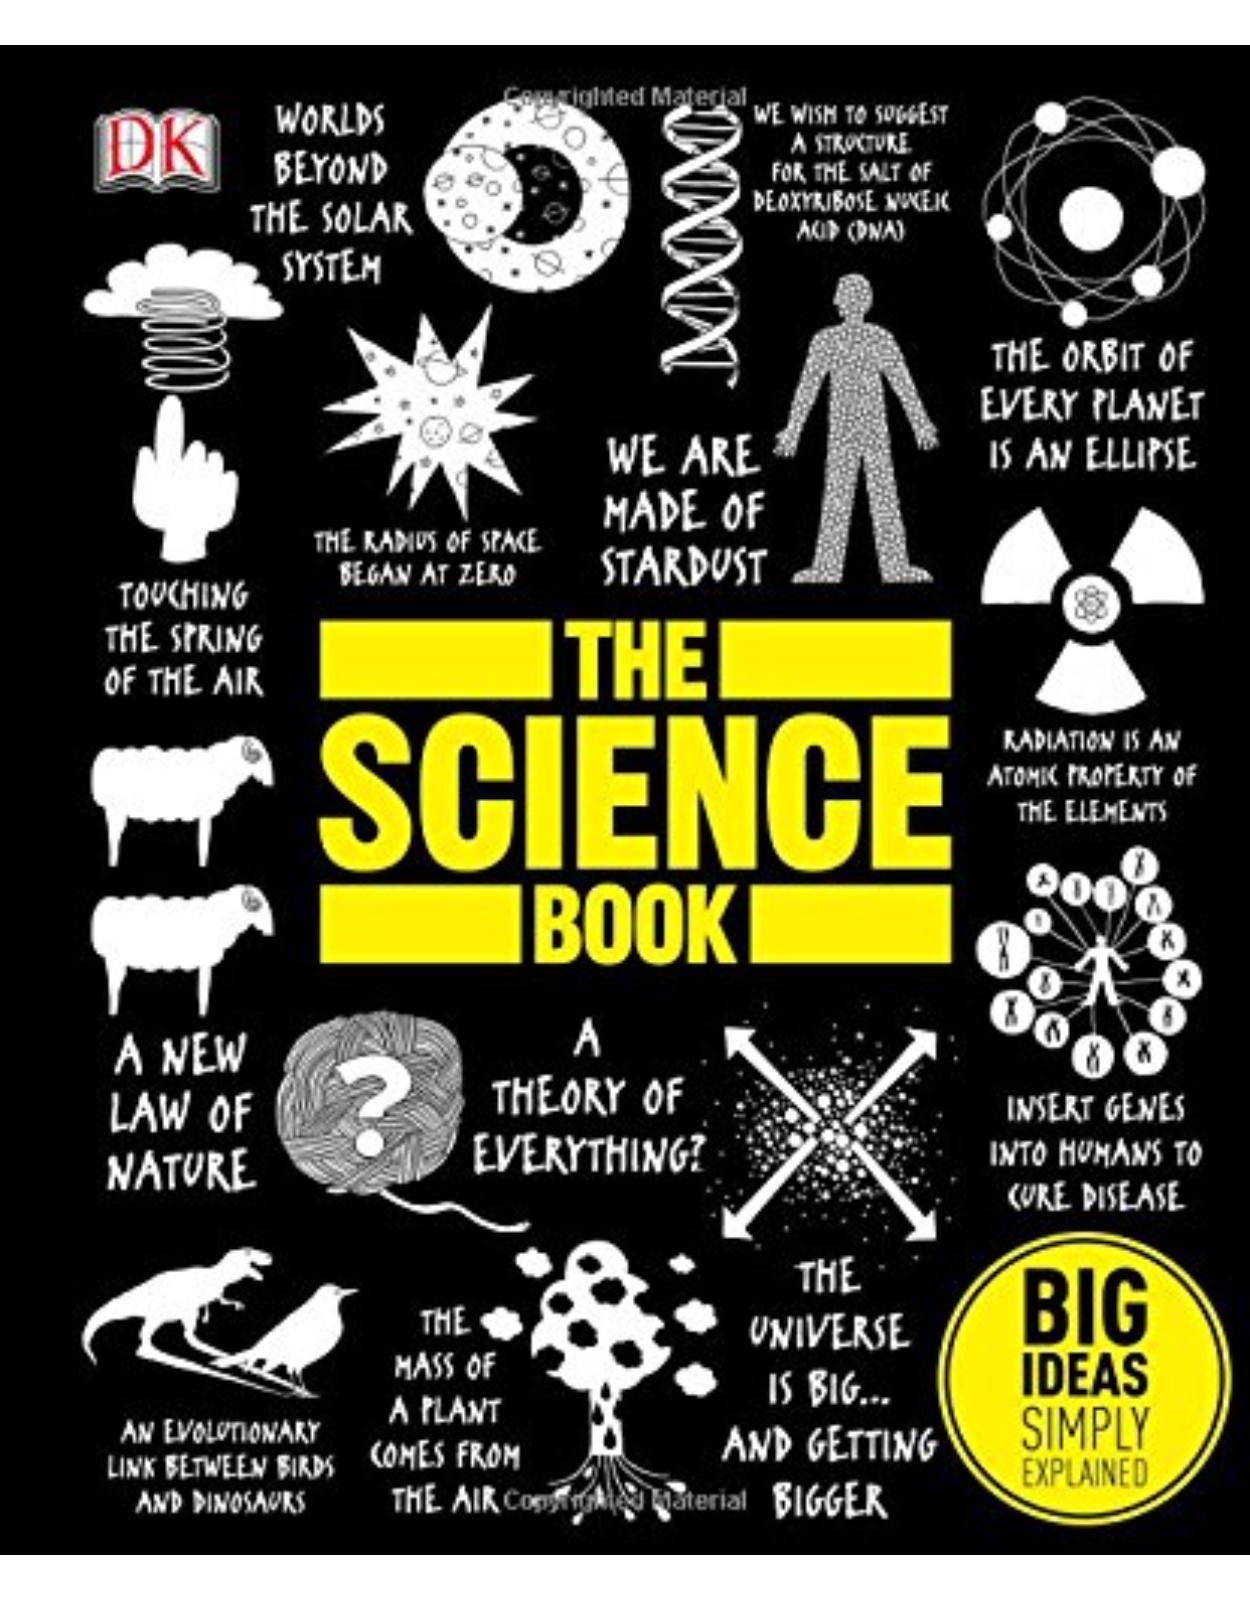 The Science Book - Big ideas simply explained